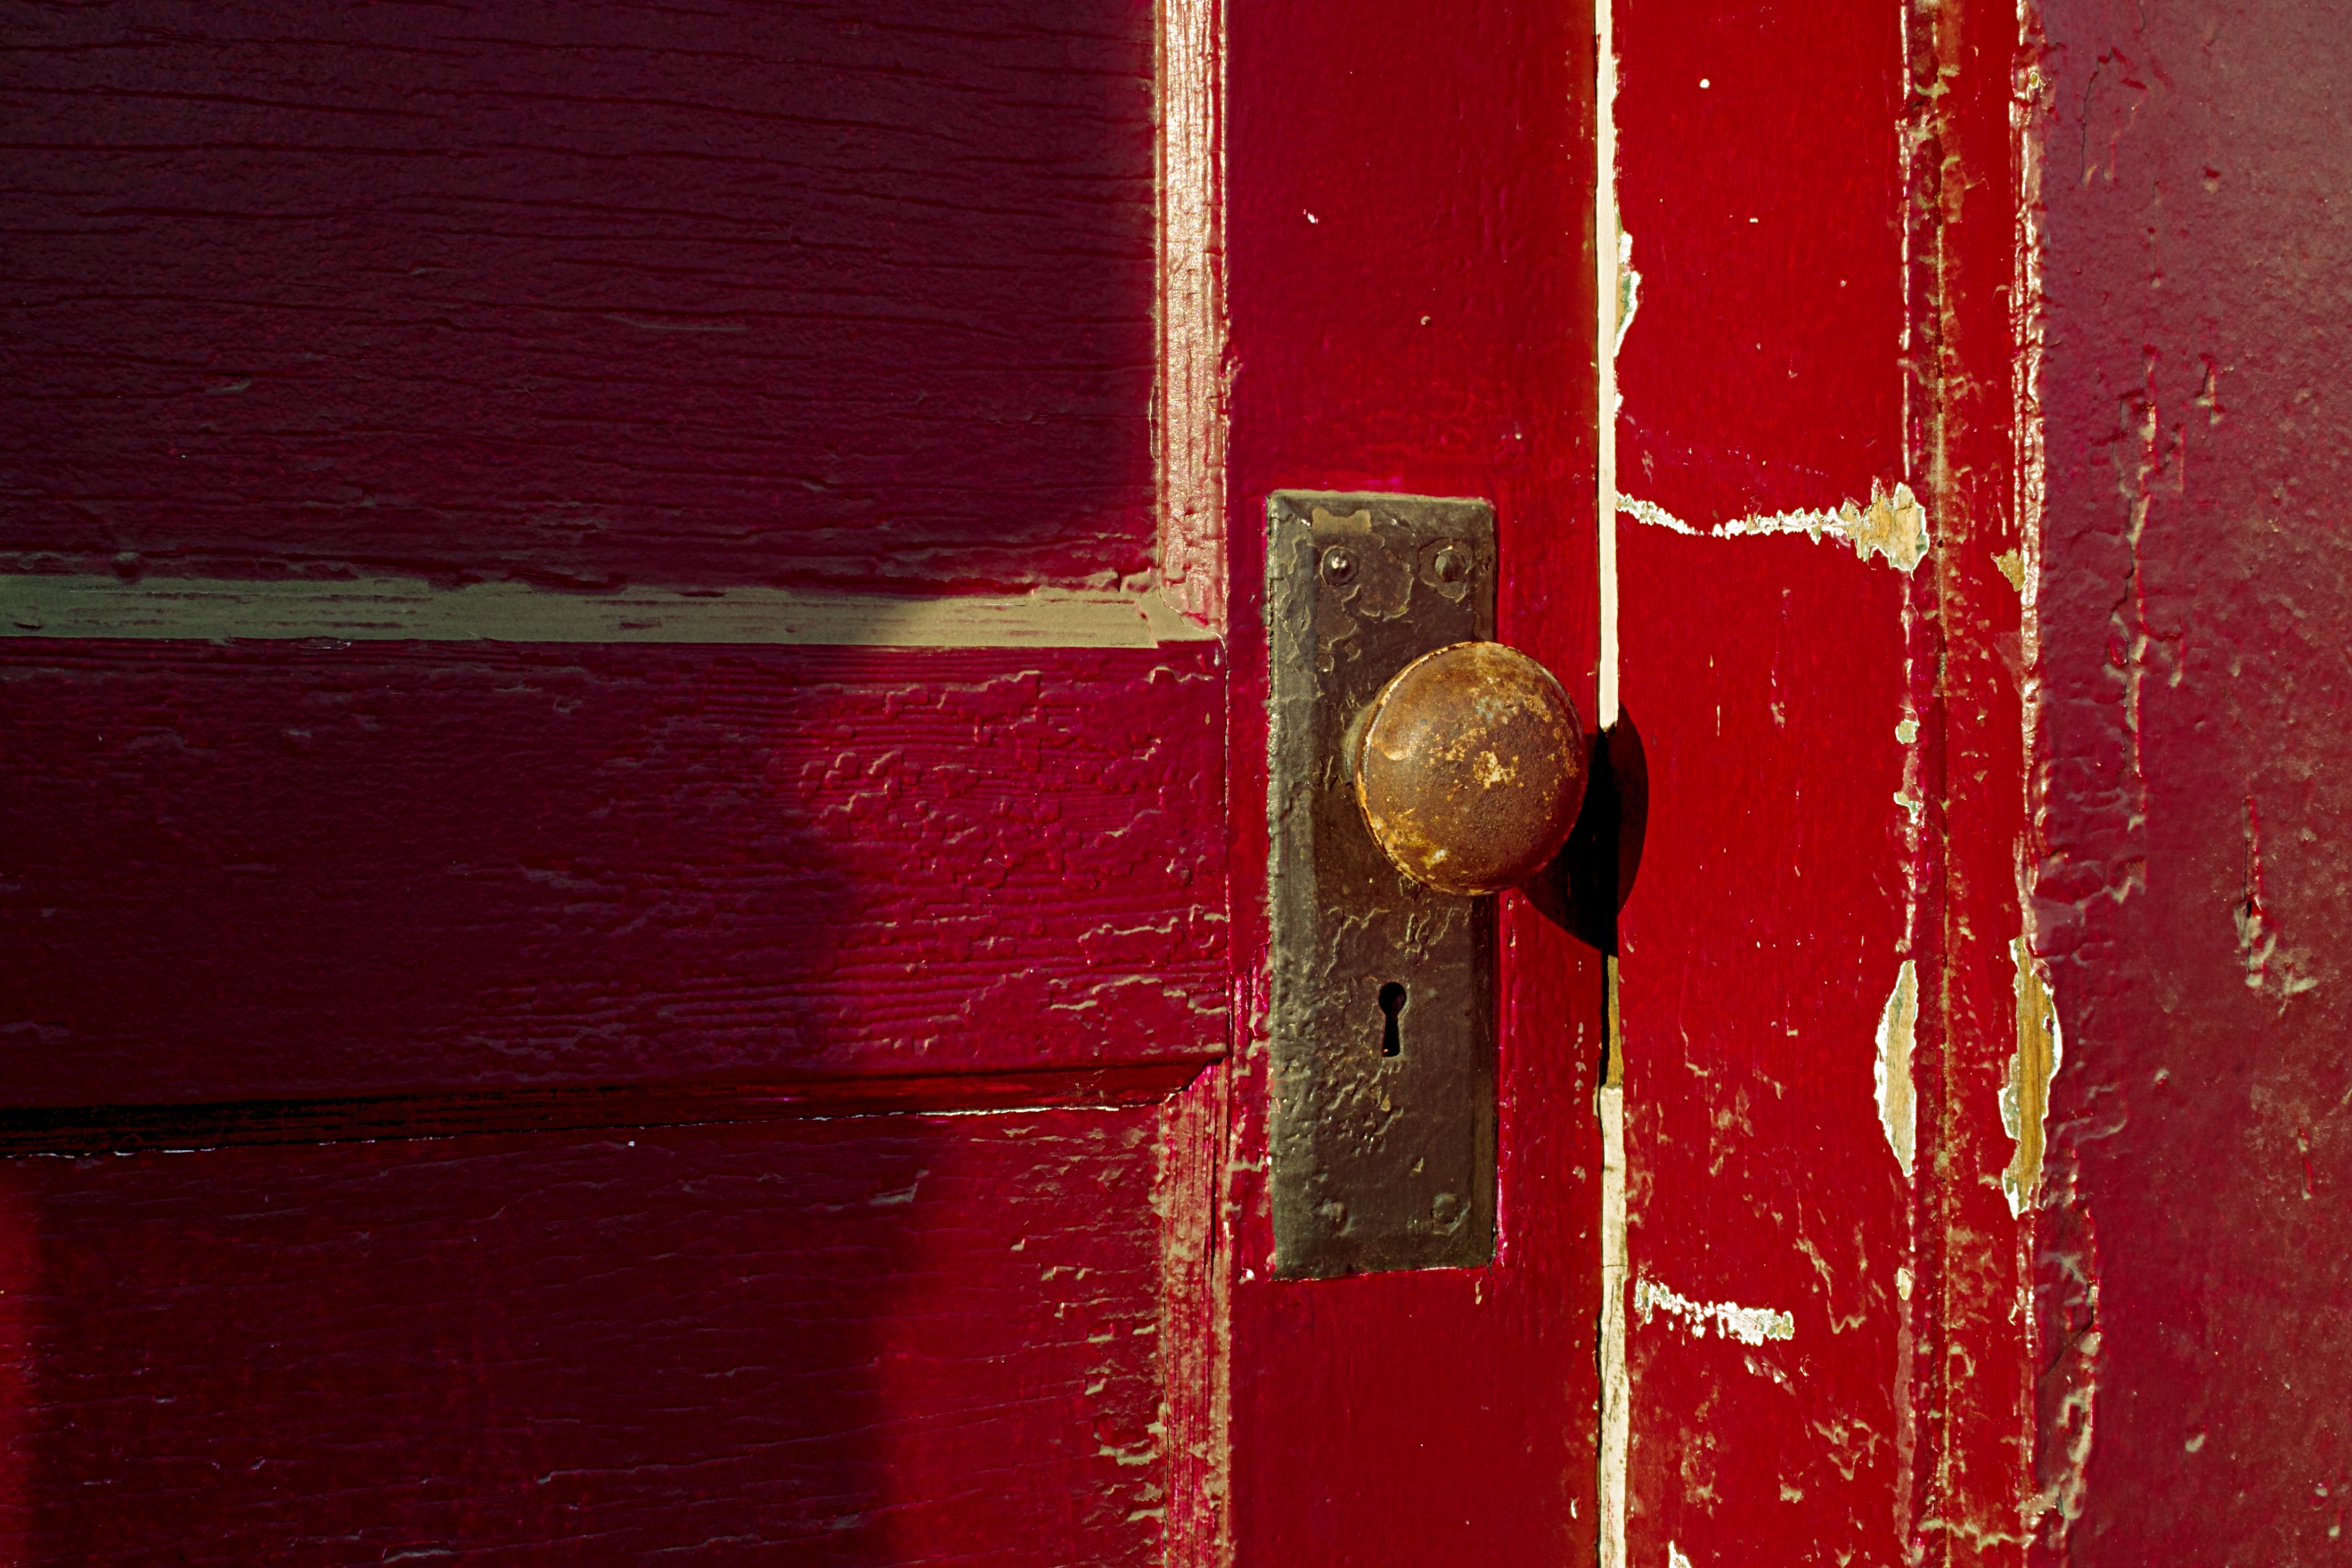 Red Door in Waterfall, VA, old general store and post office